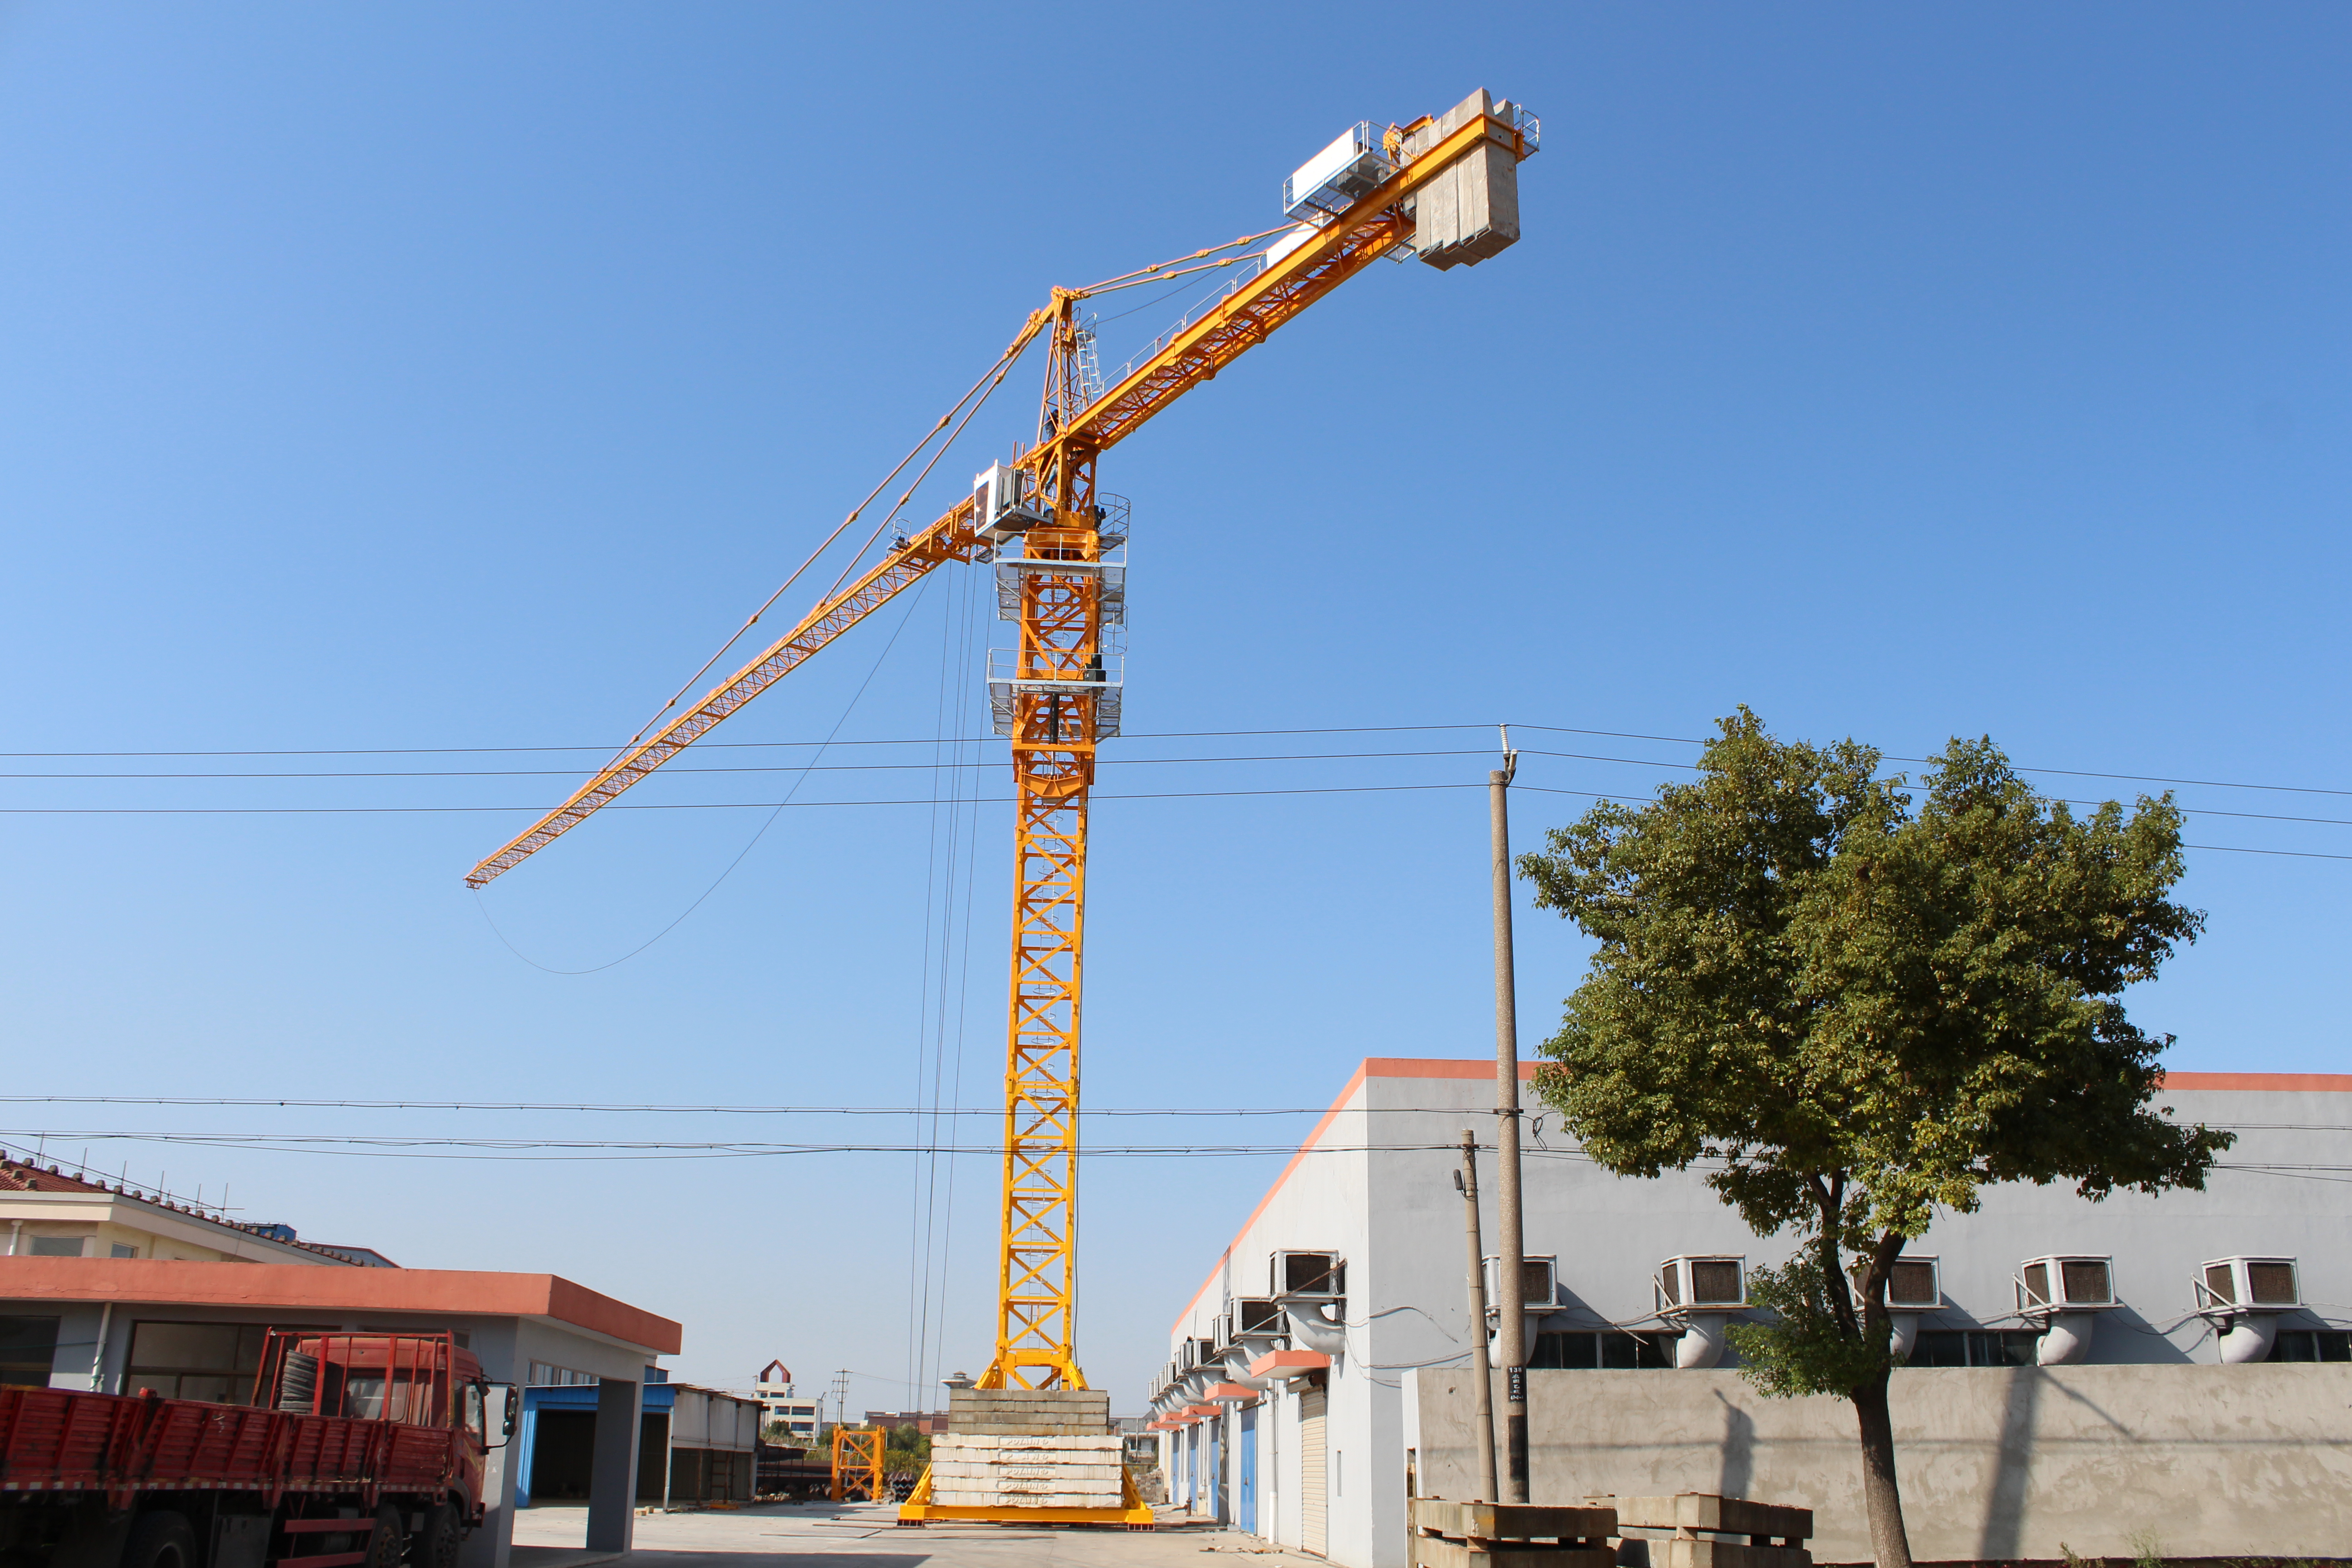 TOWER CRANE SL7050 adopts standard sections